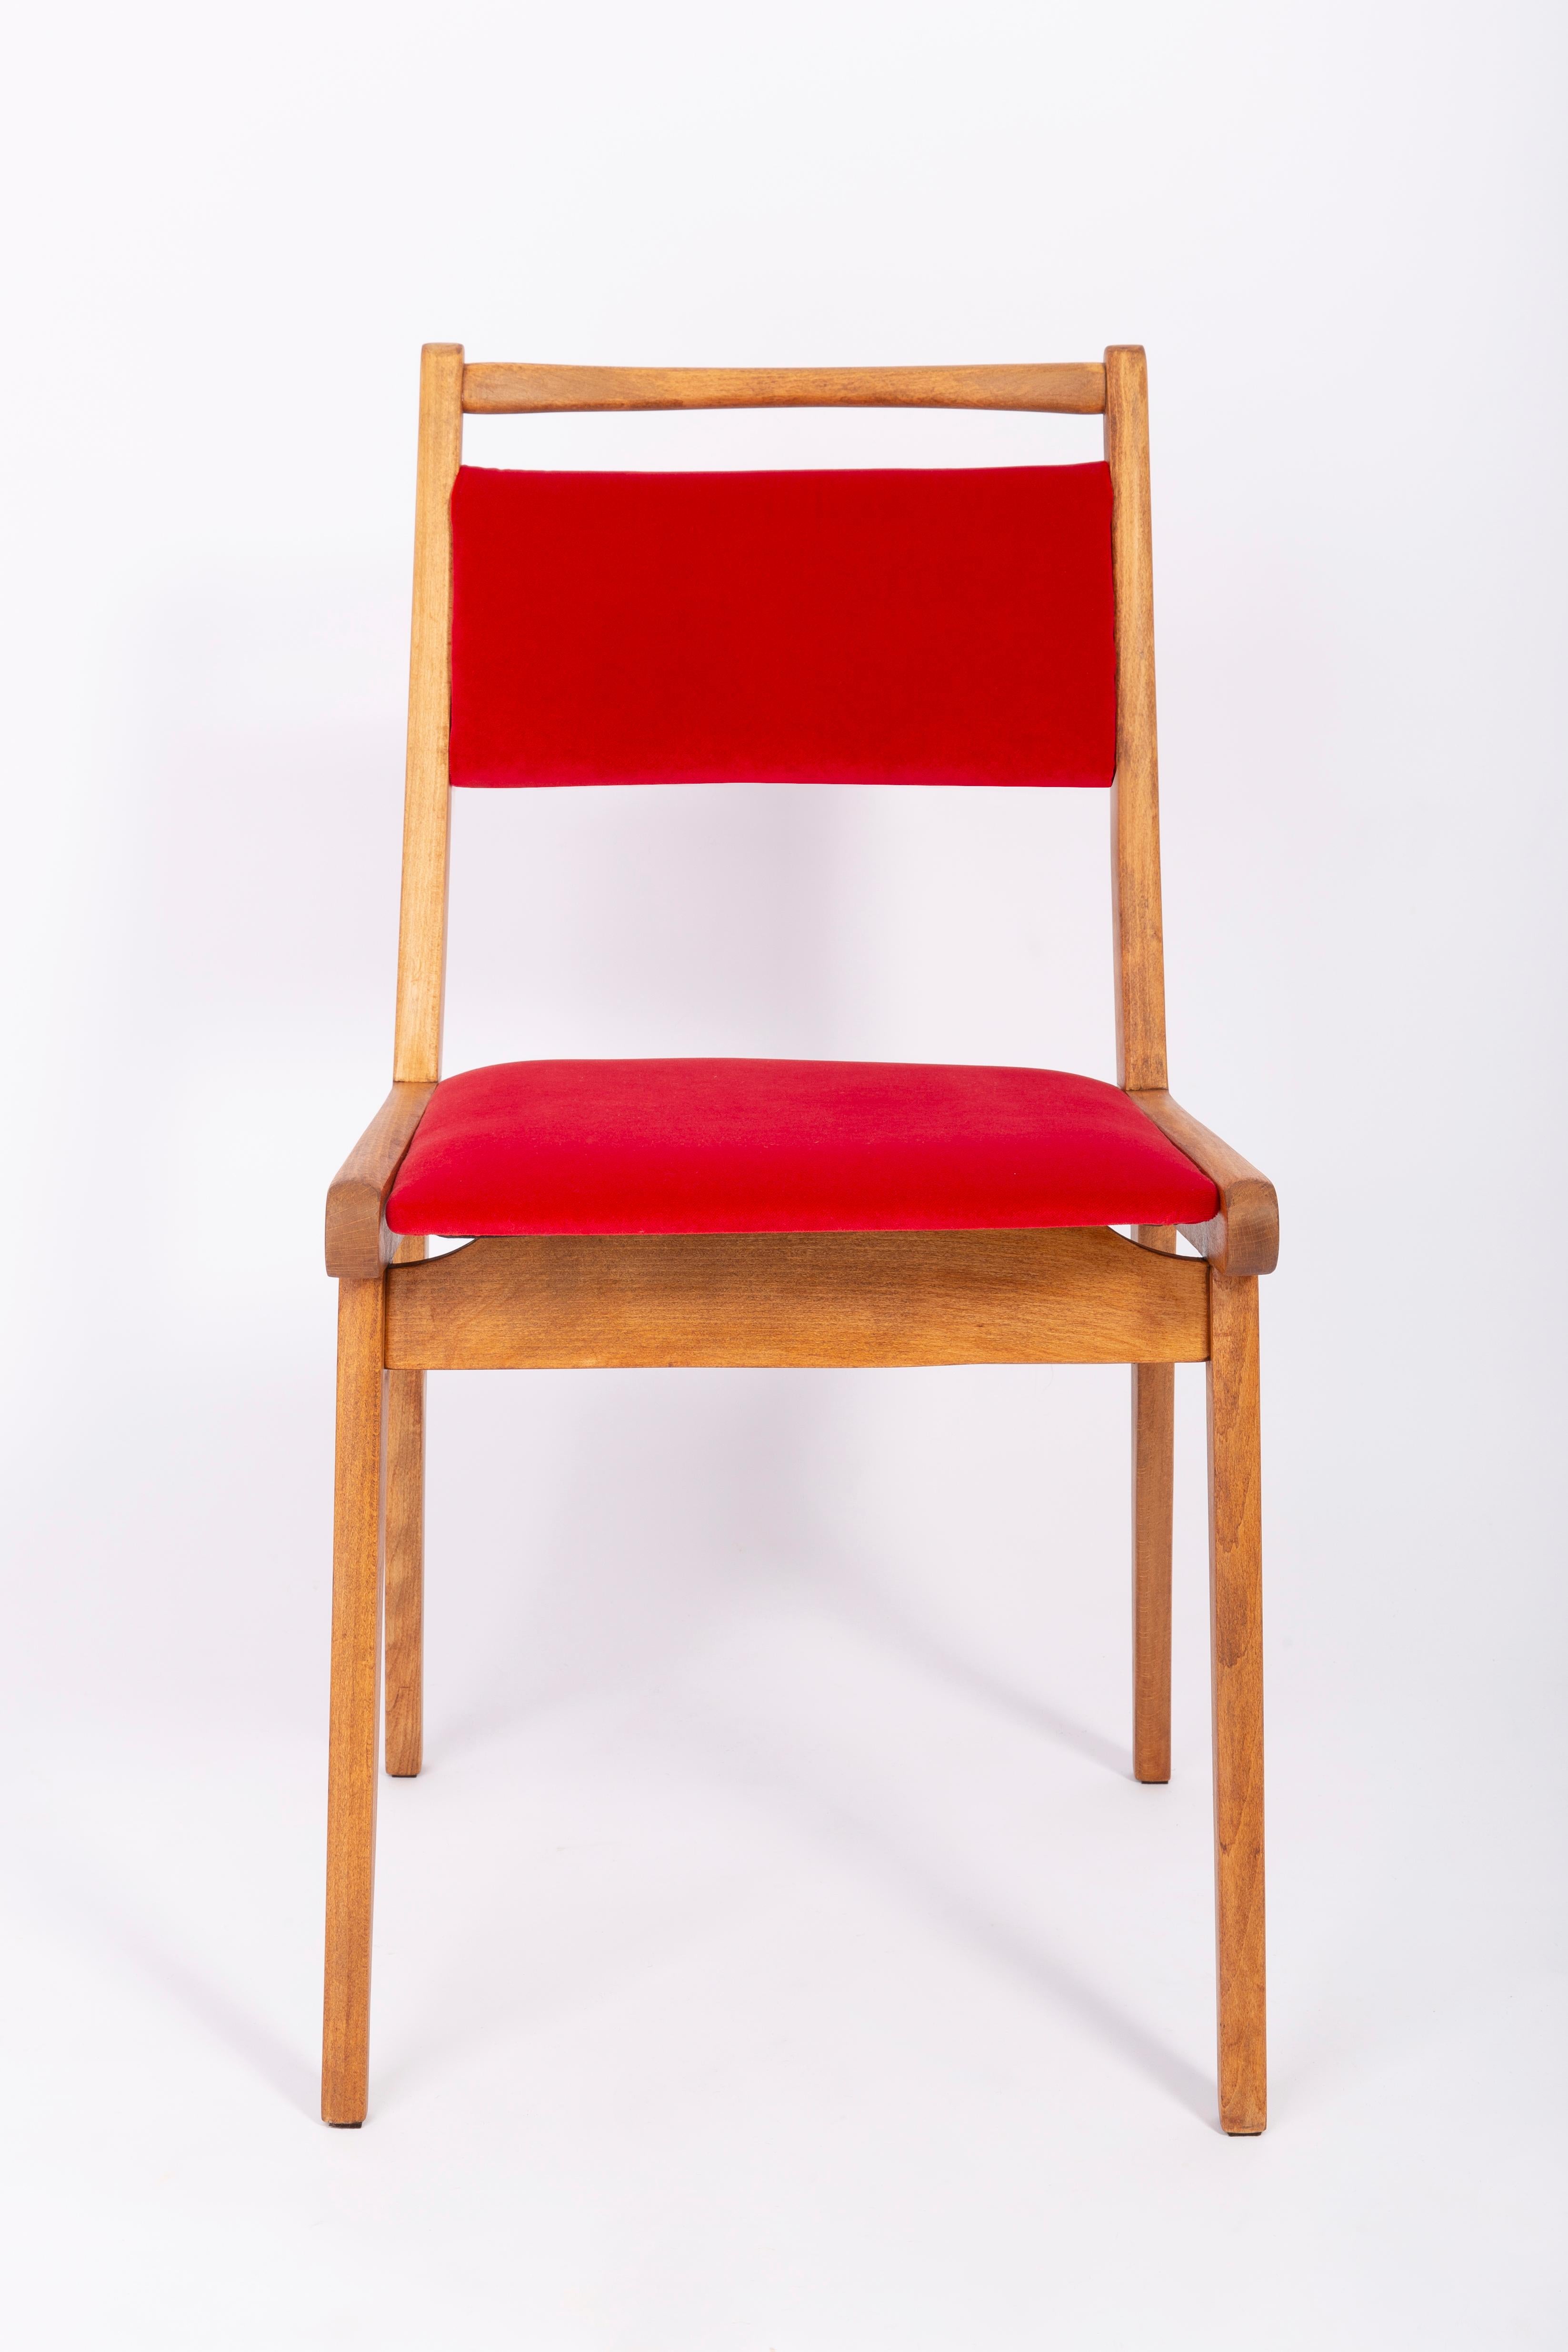 Set of Two 20th Century Black and Red Velvet Chairs, Poland, 1960s For Sale 11